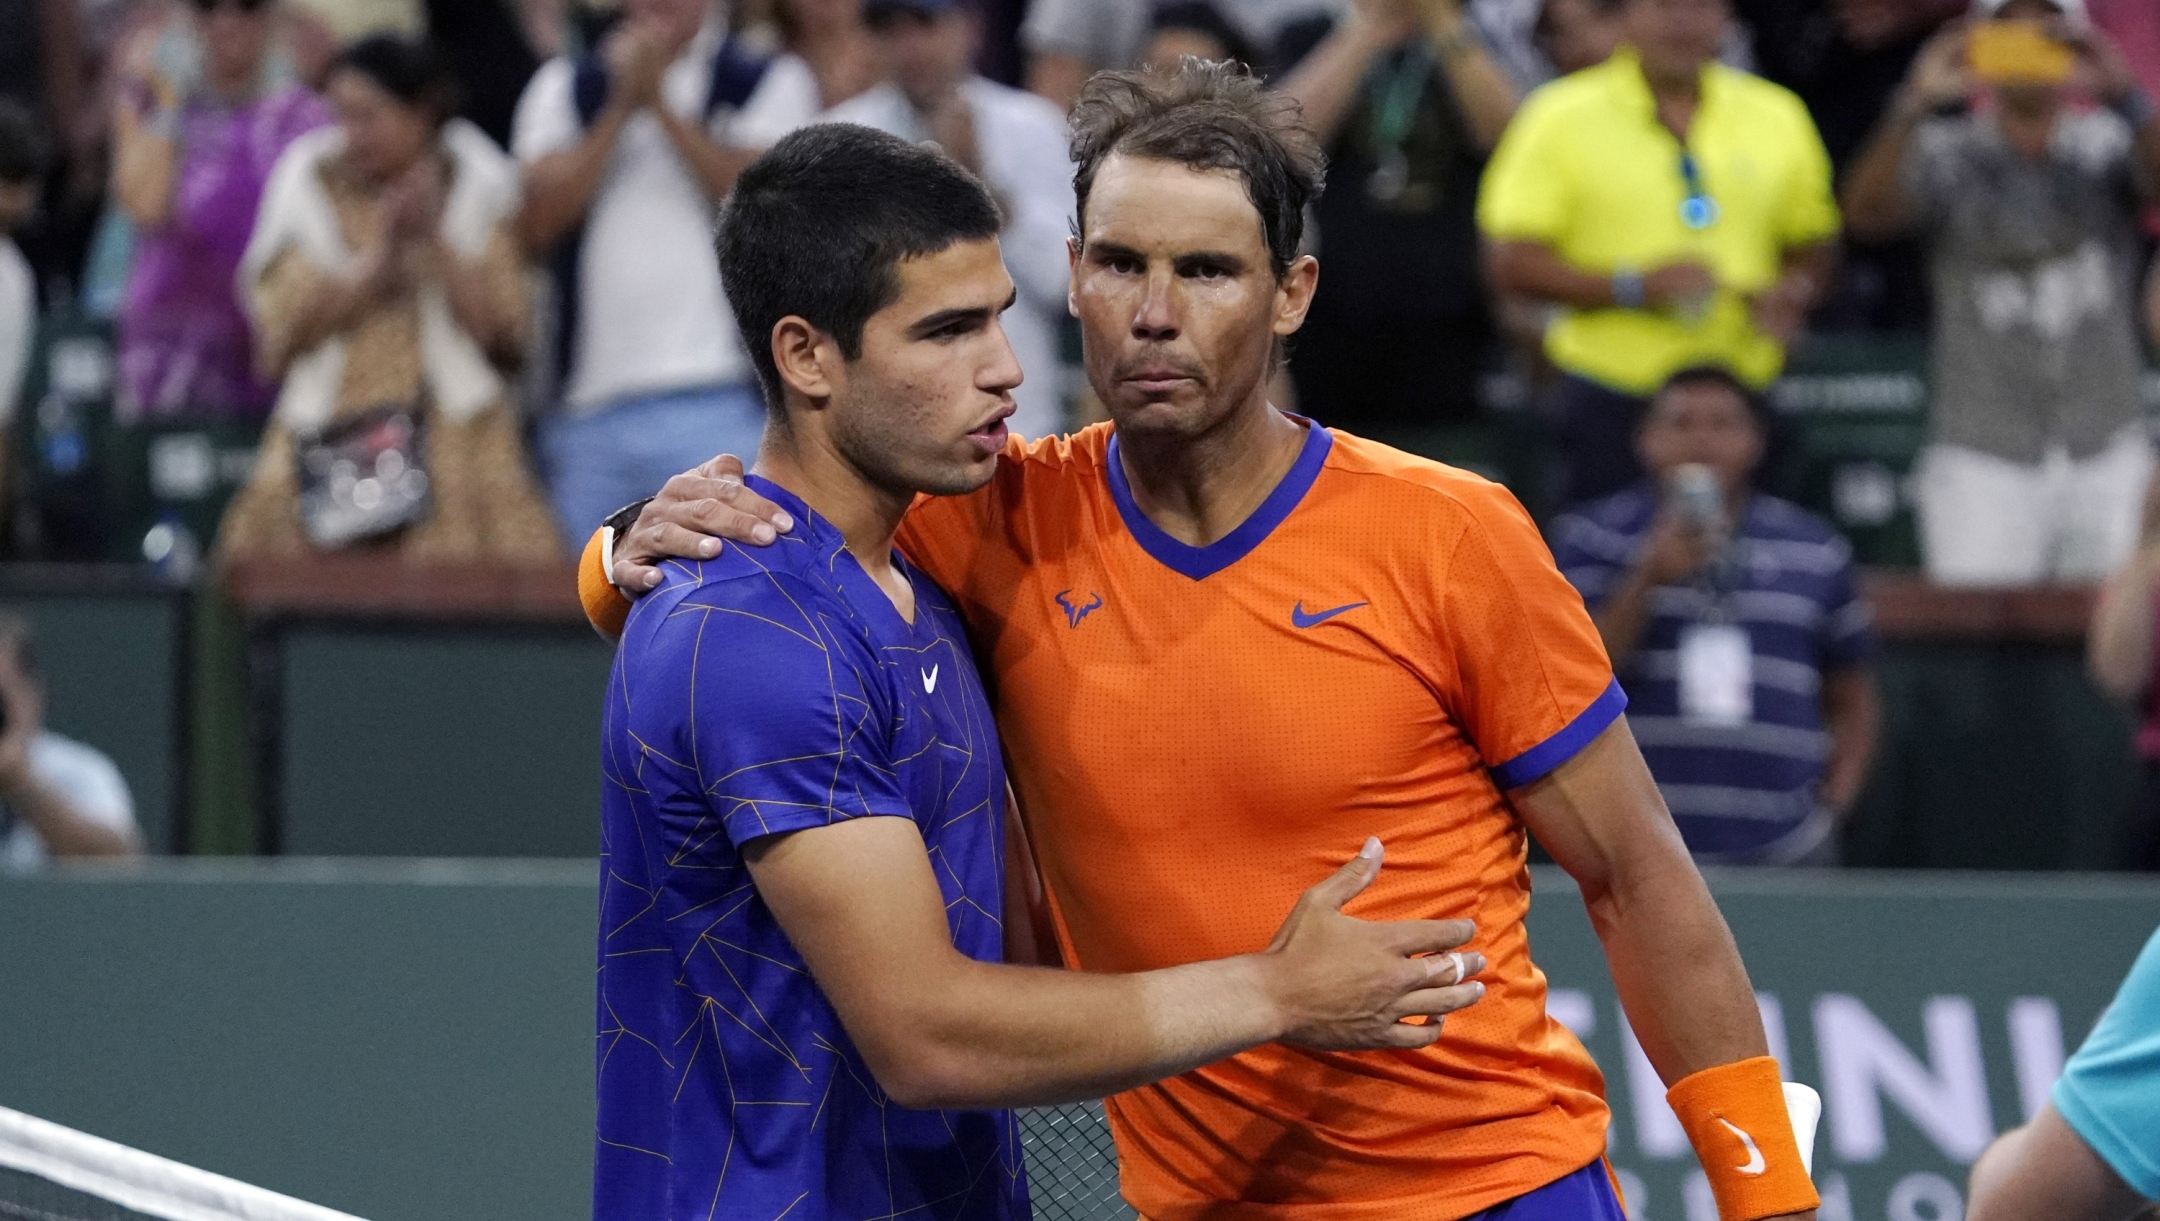 FILE - Rafael Nadal, of Spain, right, greets compatriot Carlos Alcaraz after defeating him in the men's singles semifinals at the BNP Paribas Open tennis tournament Saturday, March 19, 2022, in Indian Wells, Calif. Teenager Carlos Alcaraz is the youngest year-end No. 1 in the history of the ATP computerized rankings. He joins fellow Spaniard Rafael Nadal as the first players from the same country to claim the top two spots at the close of a season since Americans Pete Sampras and Michael Chang did it in 1996.(AP Photo/Mark J. Terrill, File)